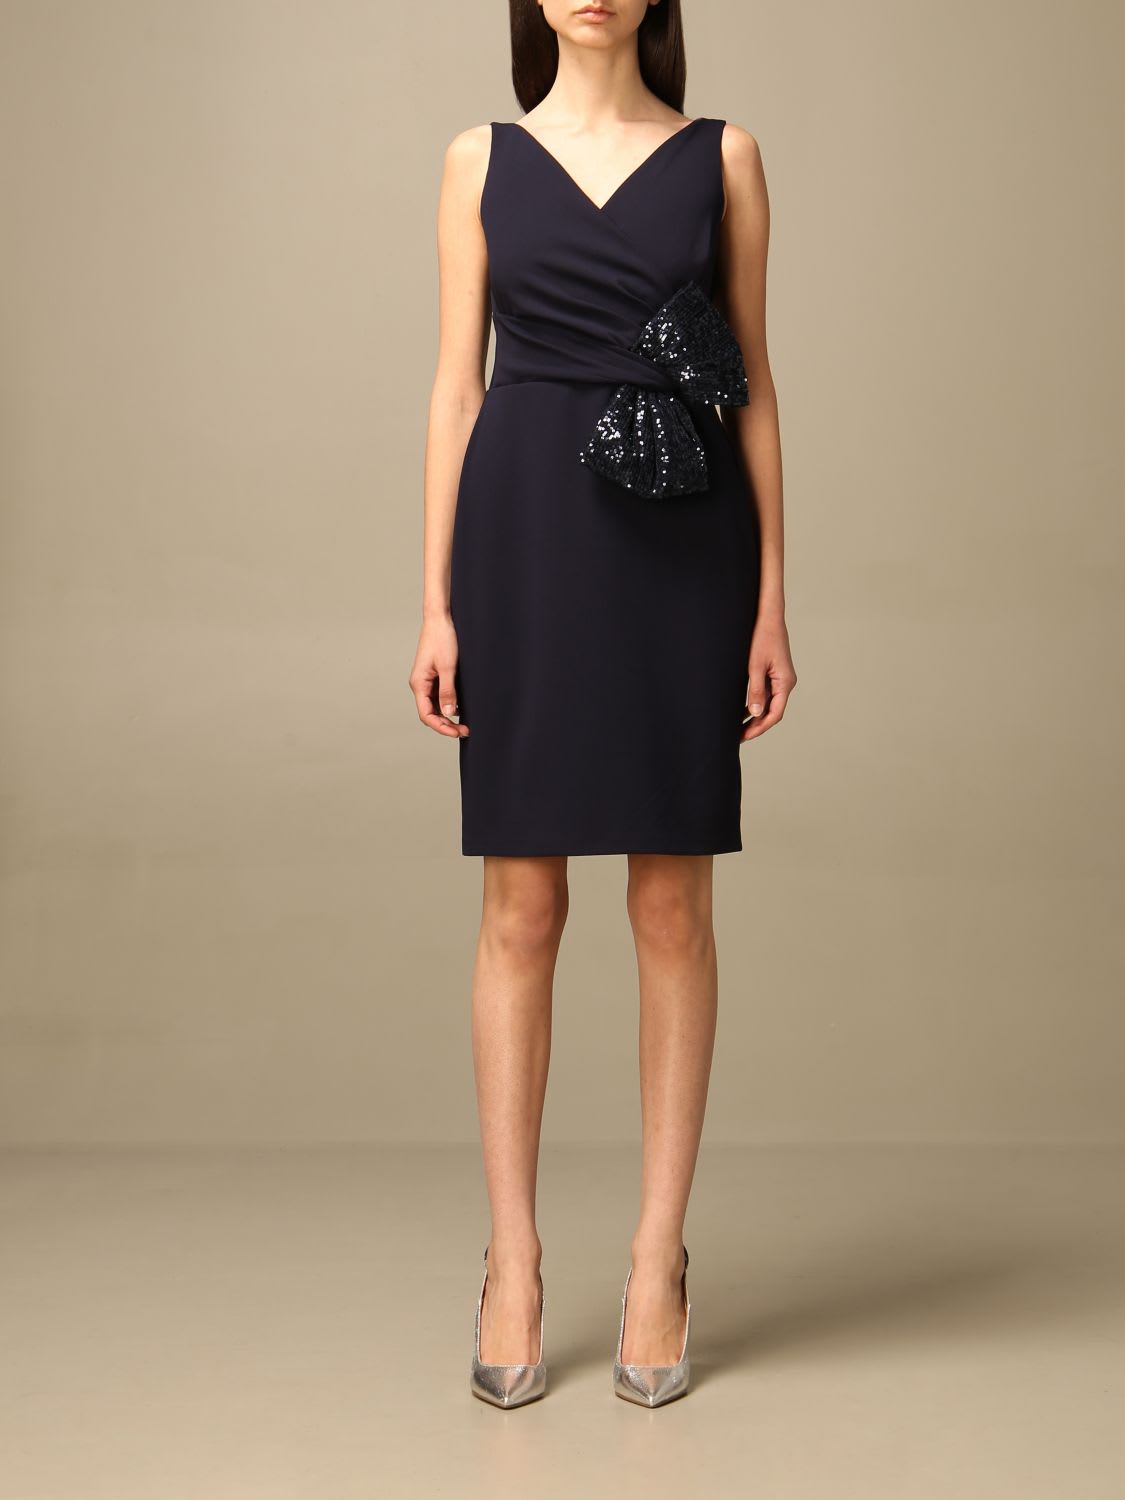 Lauren Ralph Lauren Dress Lauren Ralph Lauren Sheath Dress With Sequin Bow